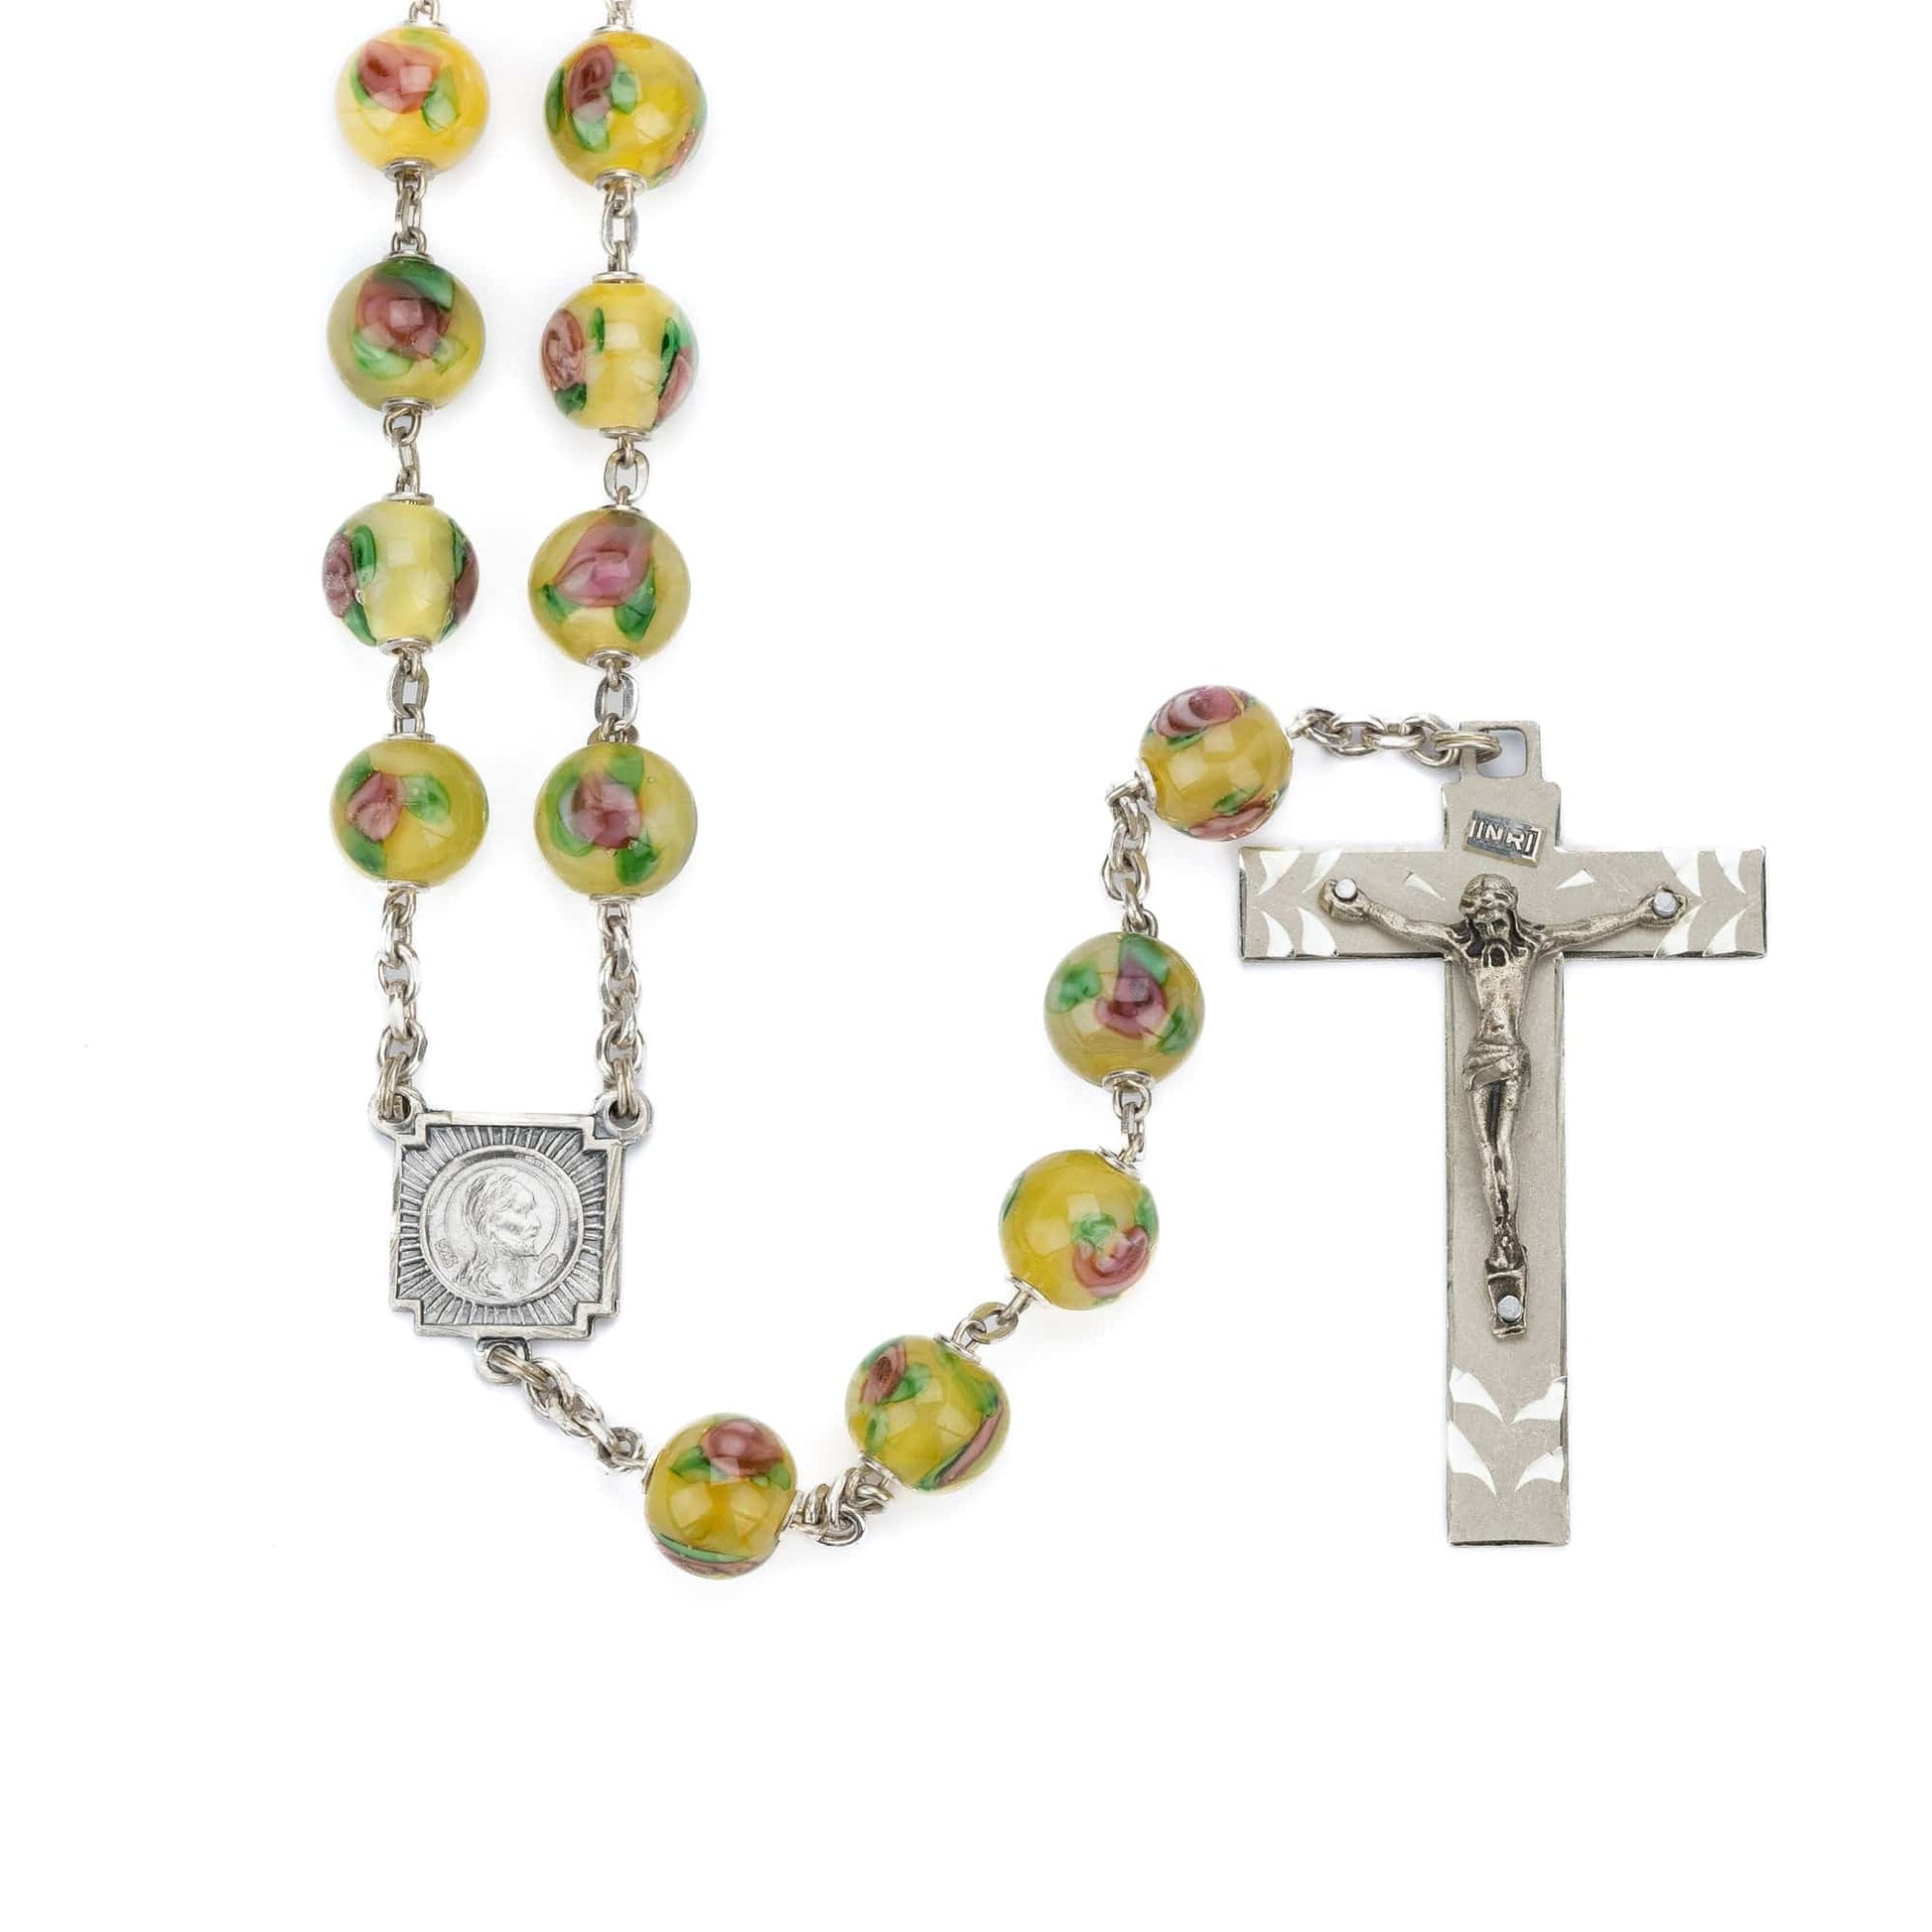 MONDO CATTOLICO Prayer Beads Sterling Silver Lampworked Pearls Rosary